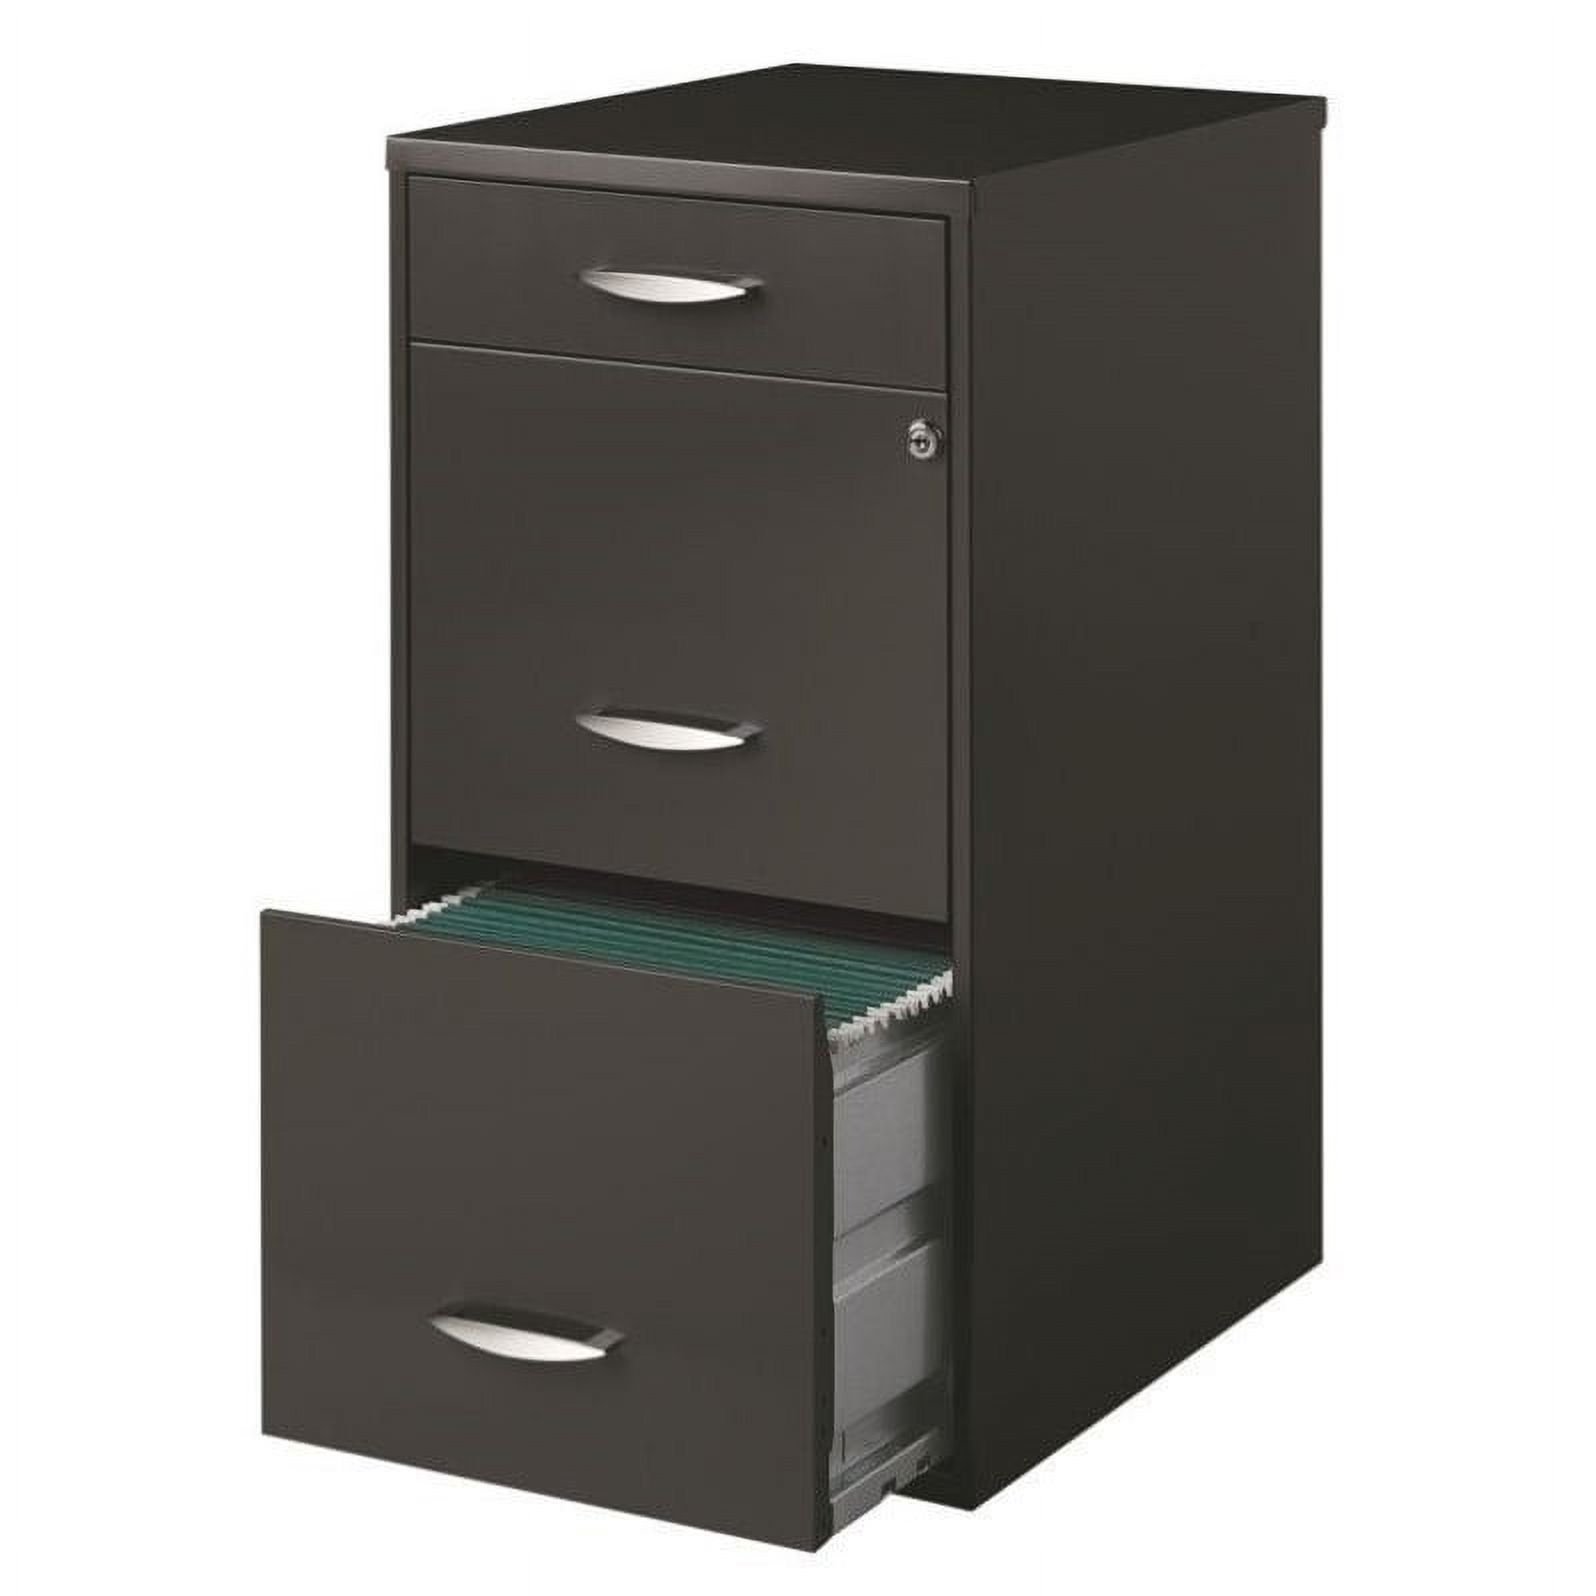 (Value Pack) 2 Drawer File Cabinet and 3 Drawer File Cabinet - image 3 of 4